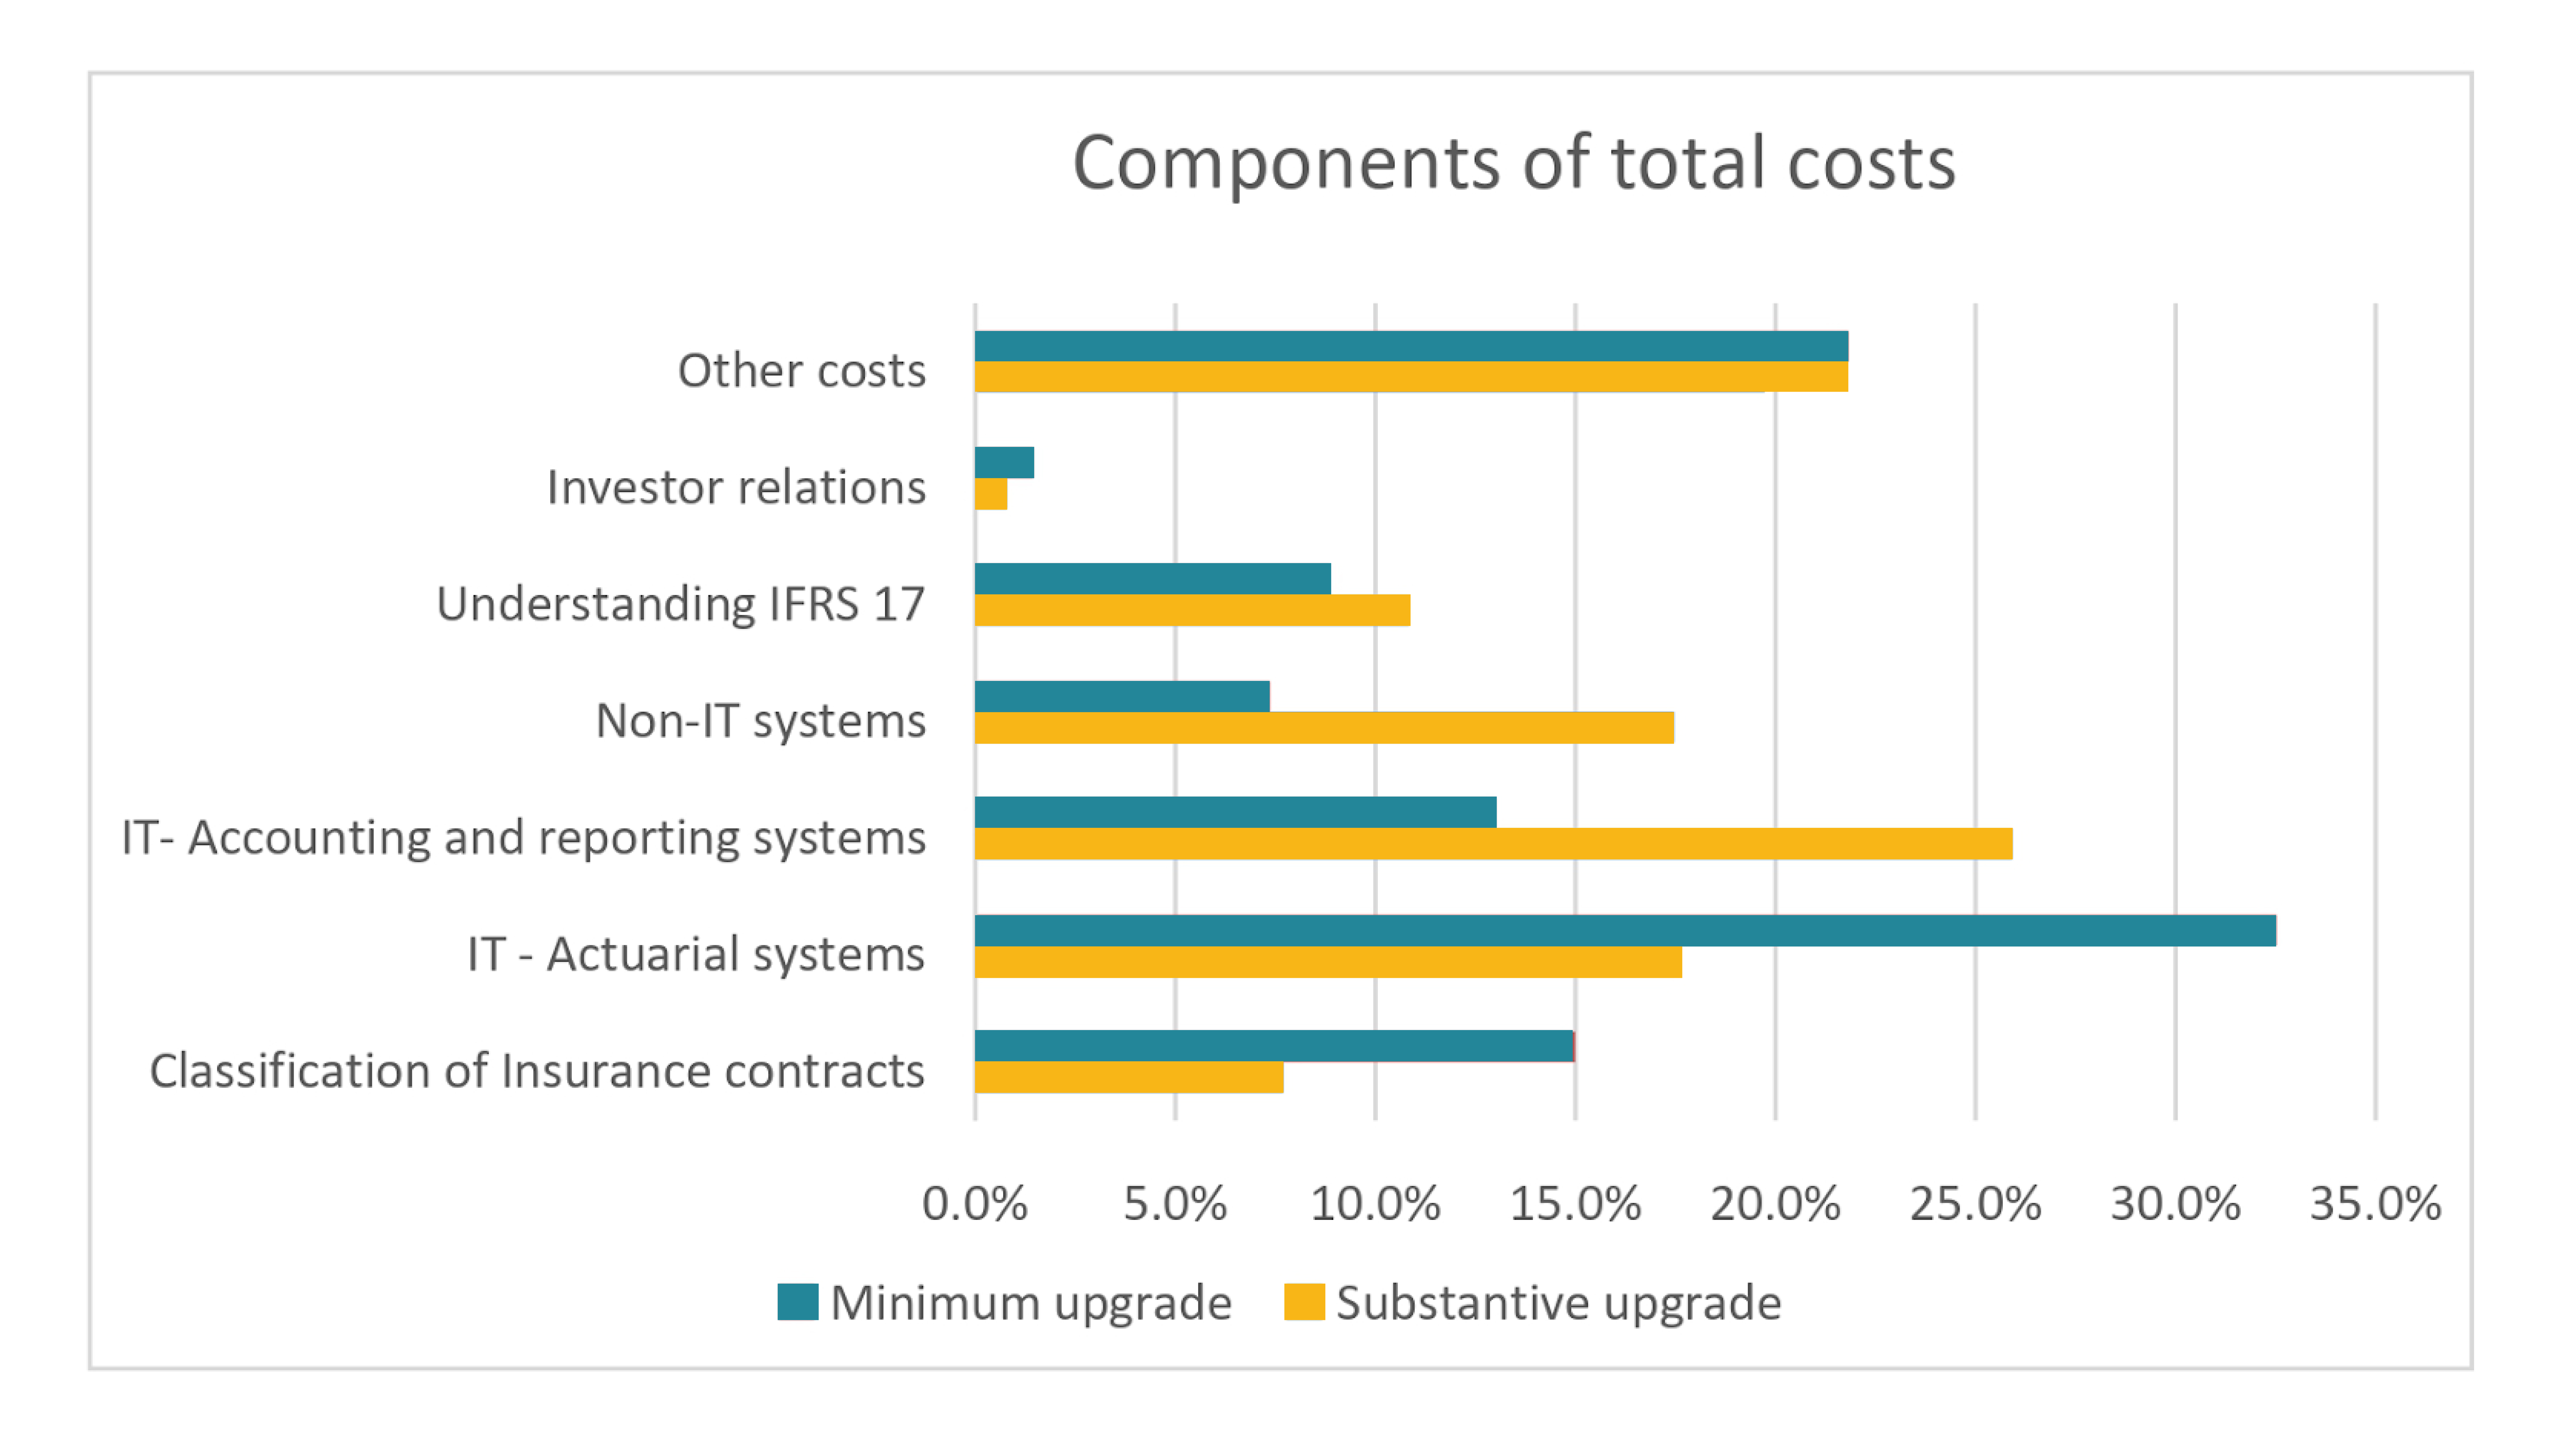 Graph on components of total costs from EFRAG study